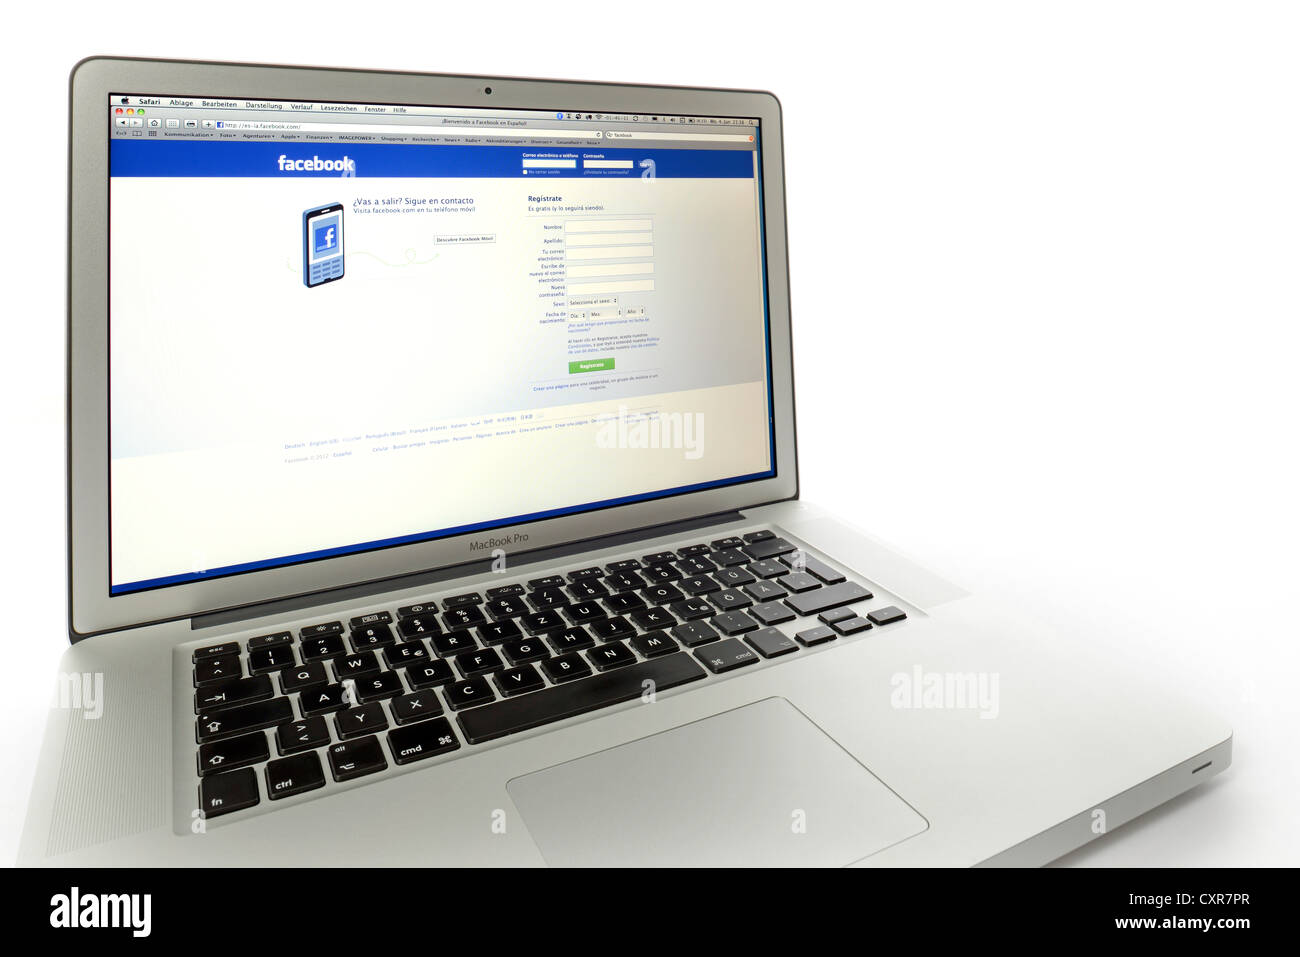 Spanish language version of Facebook, social networking website displayed on the screen of an Apple MacBook Pro Stock Photo